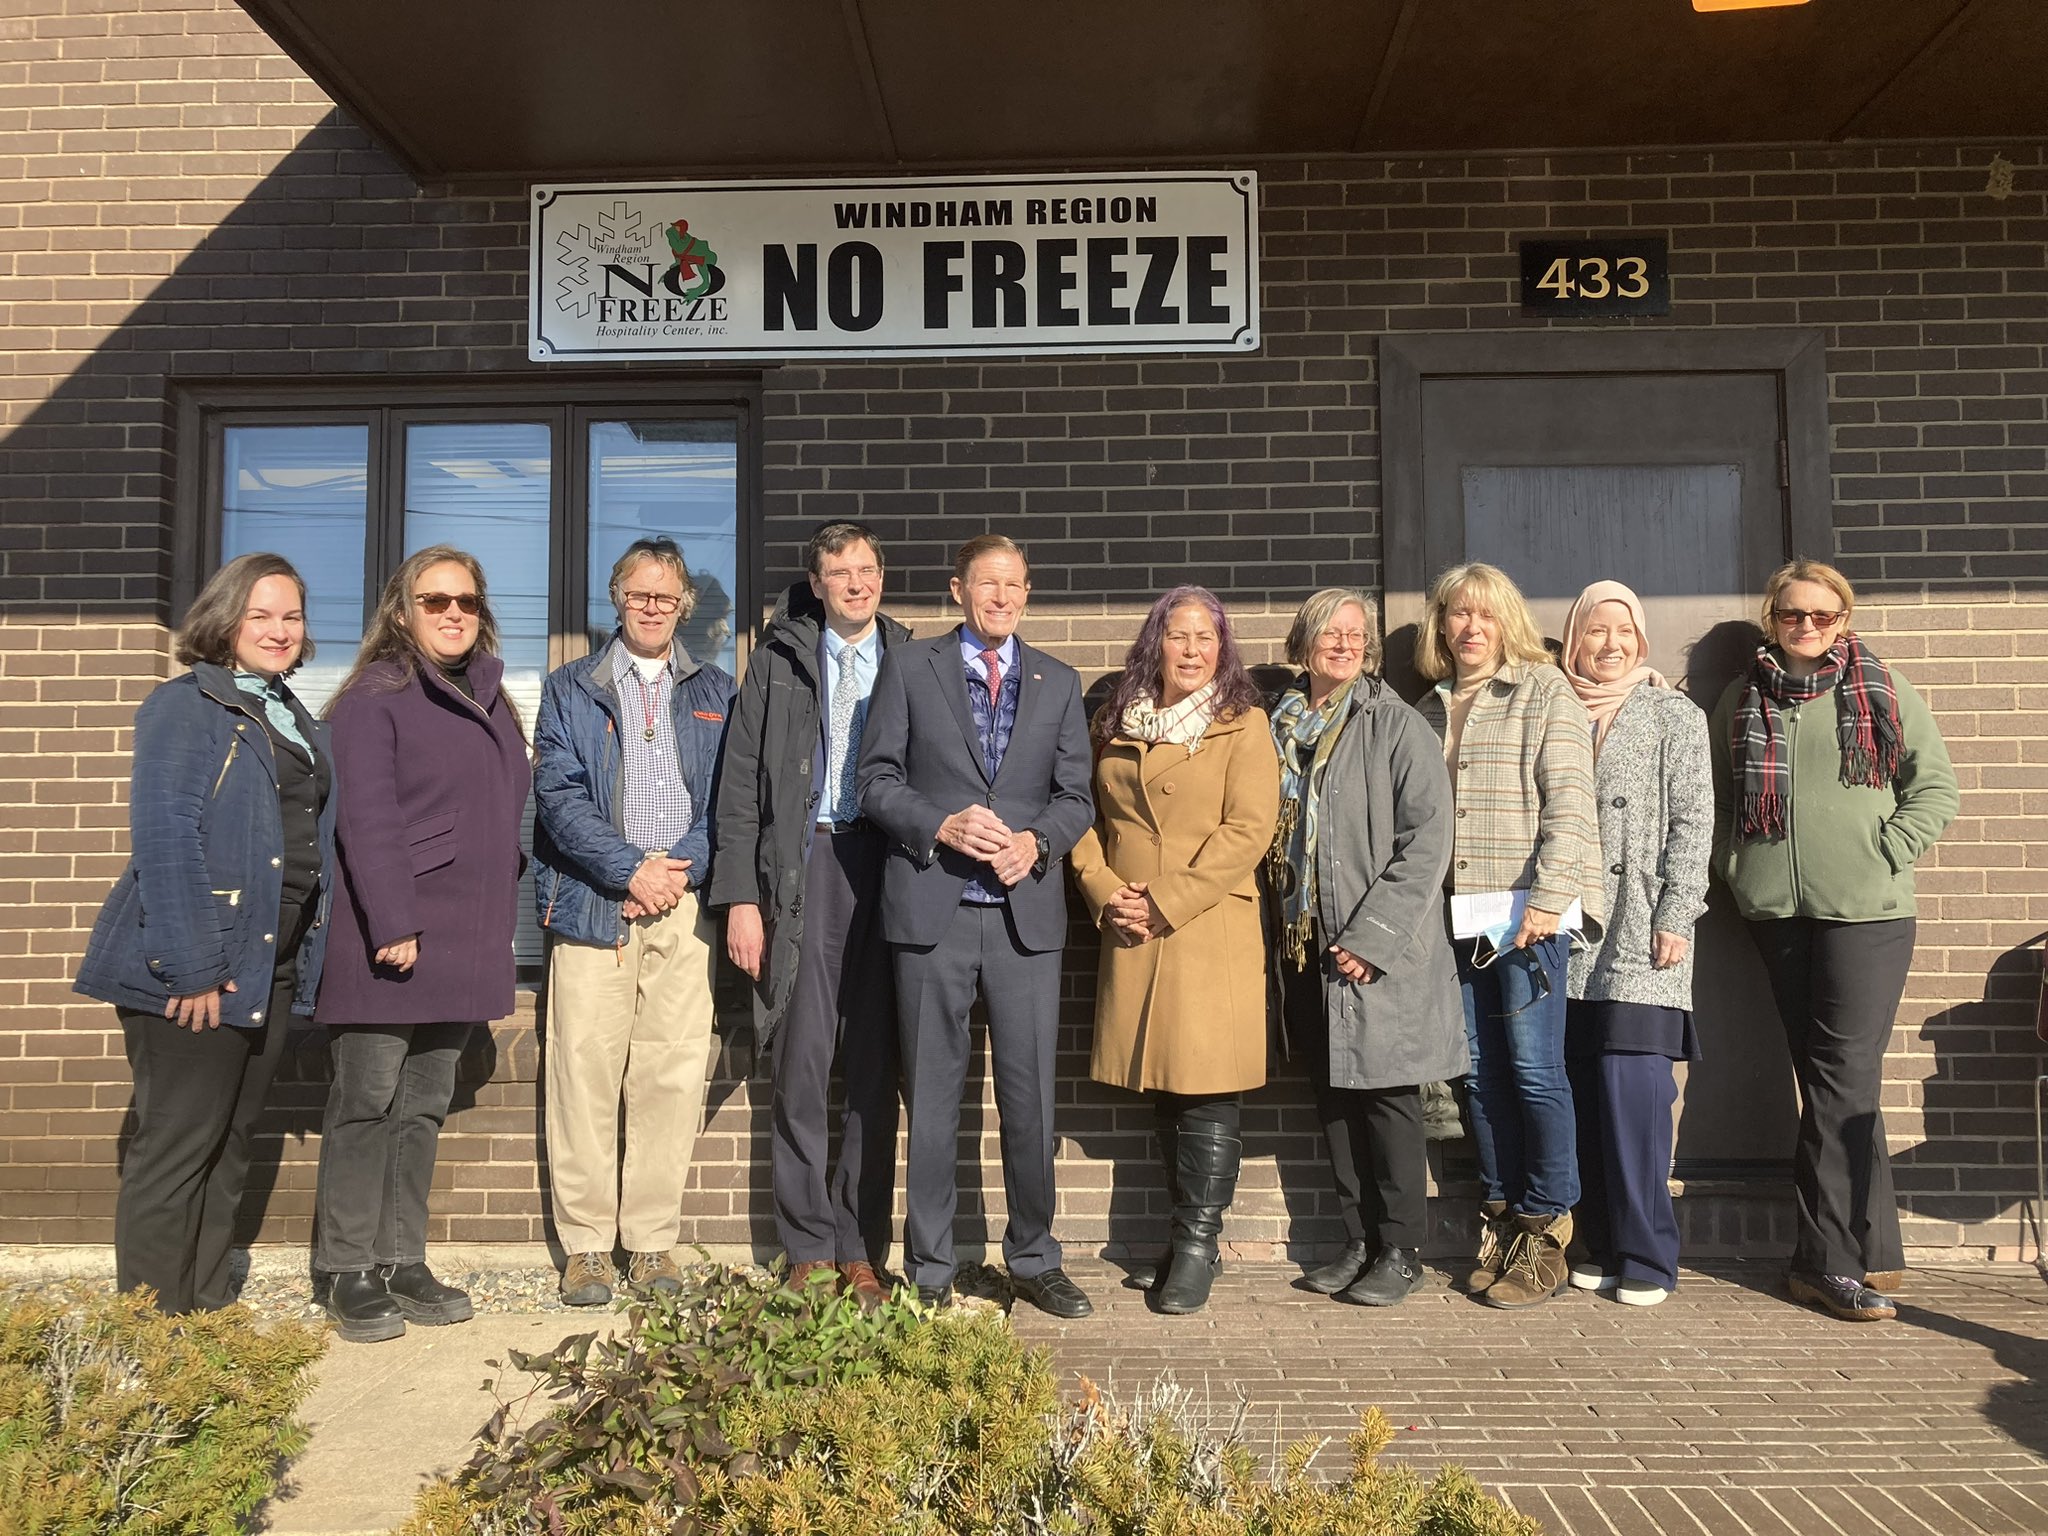 Blumenthal announced a $500,000 federal grant for the Windham Region No Freeze Project, Inc., a non-profit organization that provides temporary shelter and support services for individuals experiencing homelessness. 